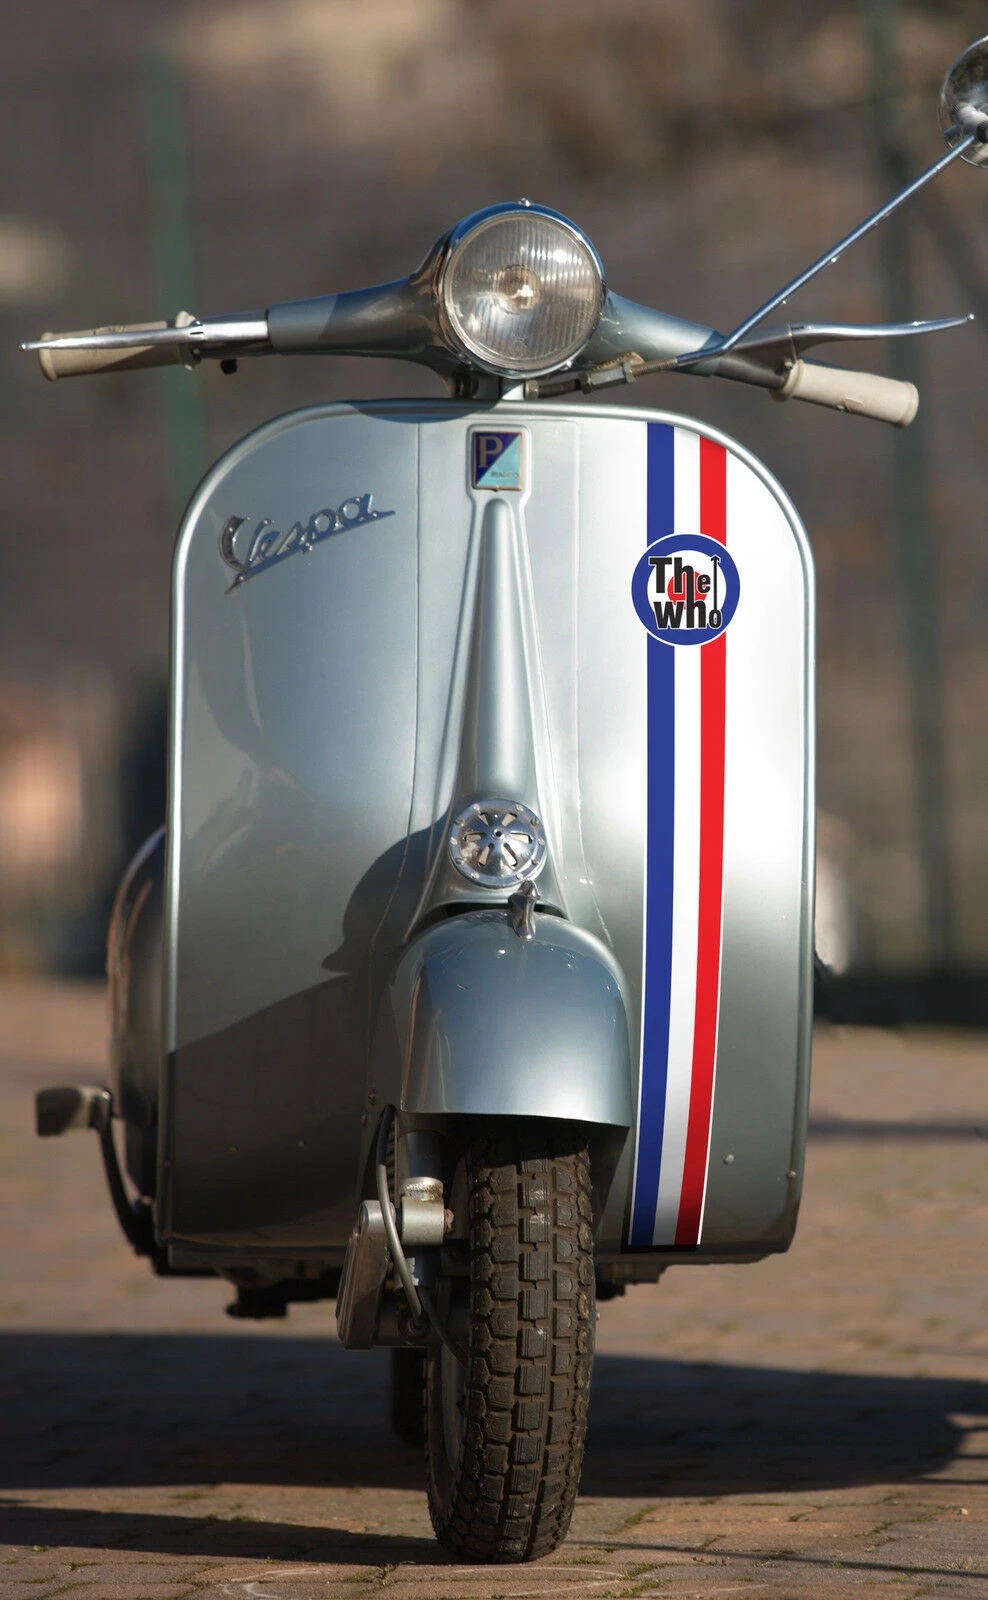 

For VESPA LAMBRETTA SCOOTER MOD Vintage Style Front Fairing Stripe THE WHO